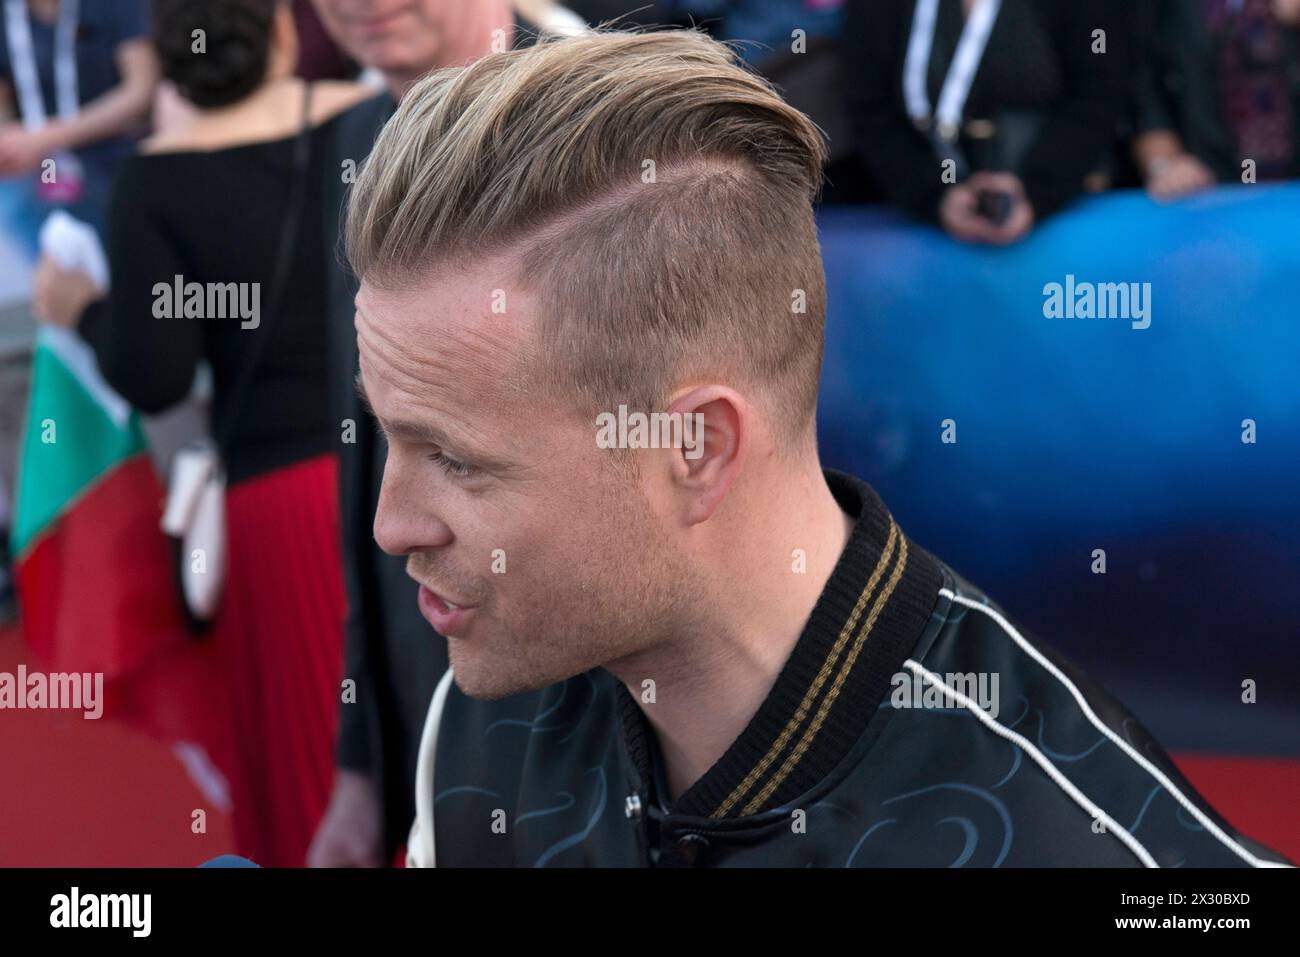 Eurovision Song Contest 2016, Stockholm, Sweden Stockholm, Sweden. 8 May. Nicky Byrne from Ireland on the red carpet for the ESC 2016. Stockholm Euroclub Sweden *** Eurovision Song Contest 2016, Stockholm, Sweden Stockholm, Sweden 8 May Nicky Byrne from Ireland on the red carpet for the ESC 2016 Stockholm Euroclub Sweden Stock Photo